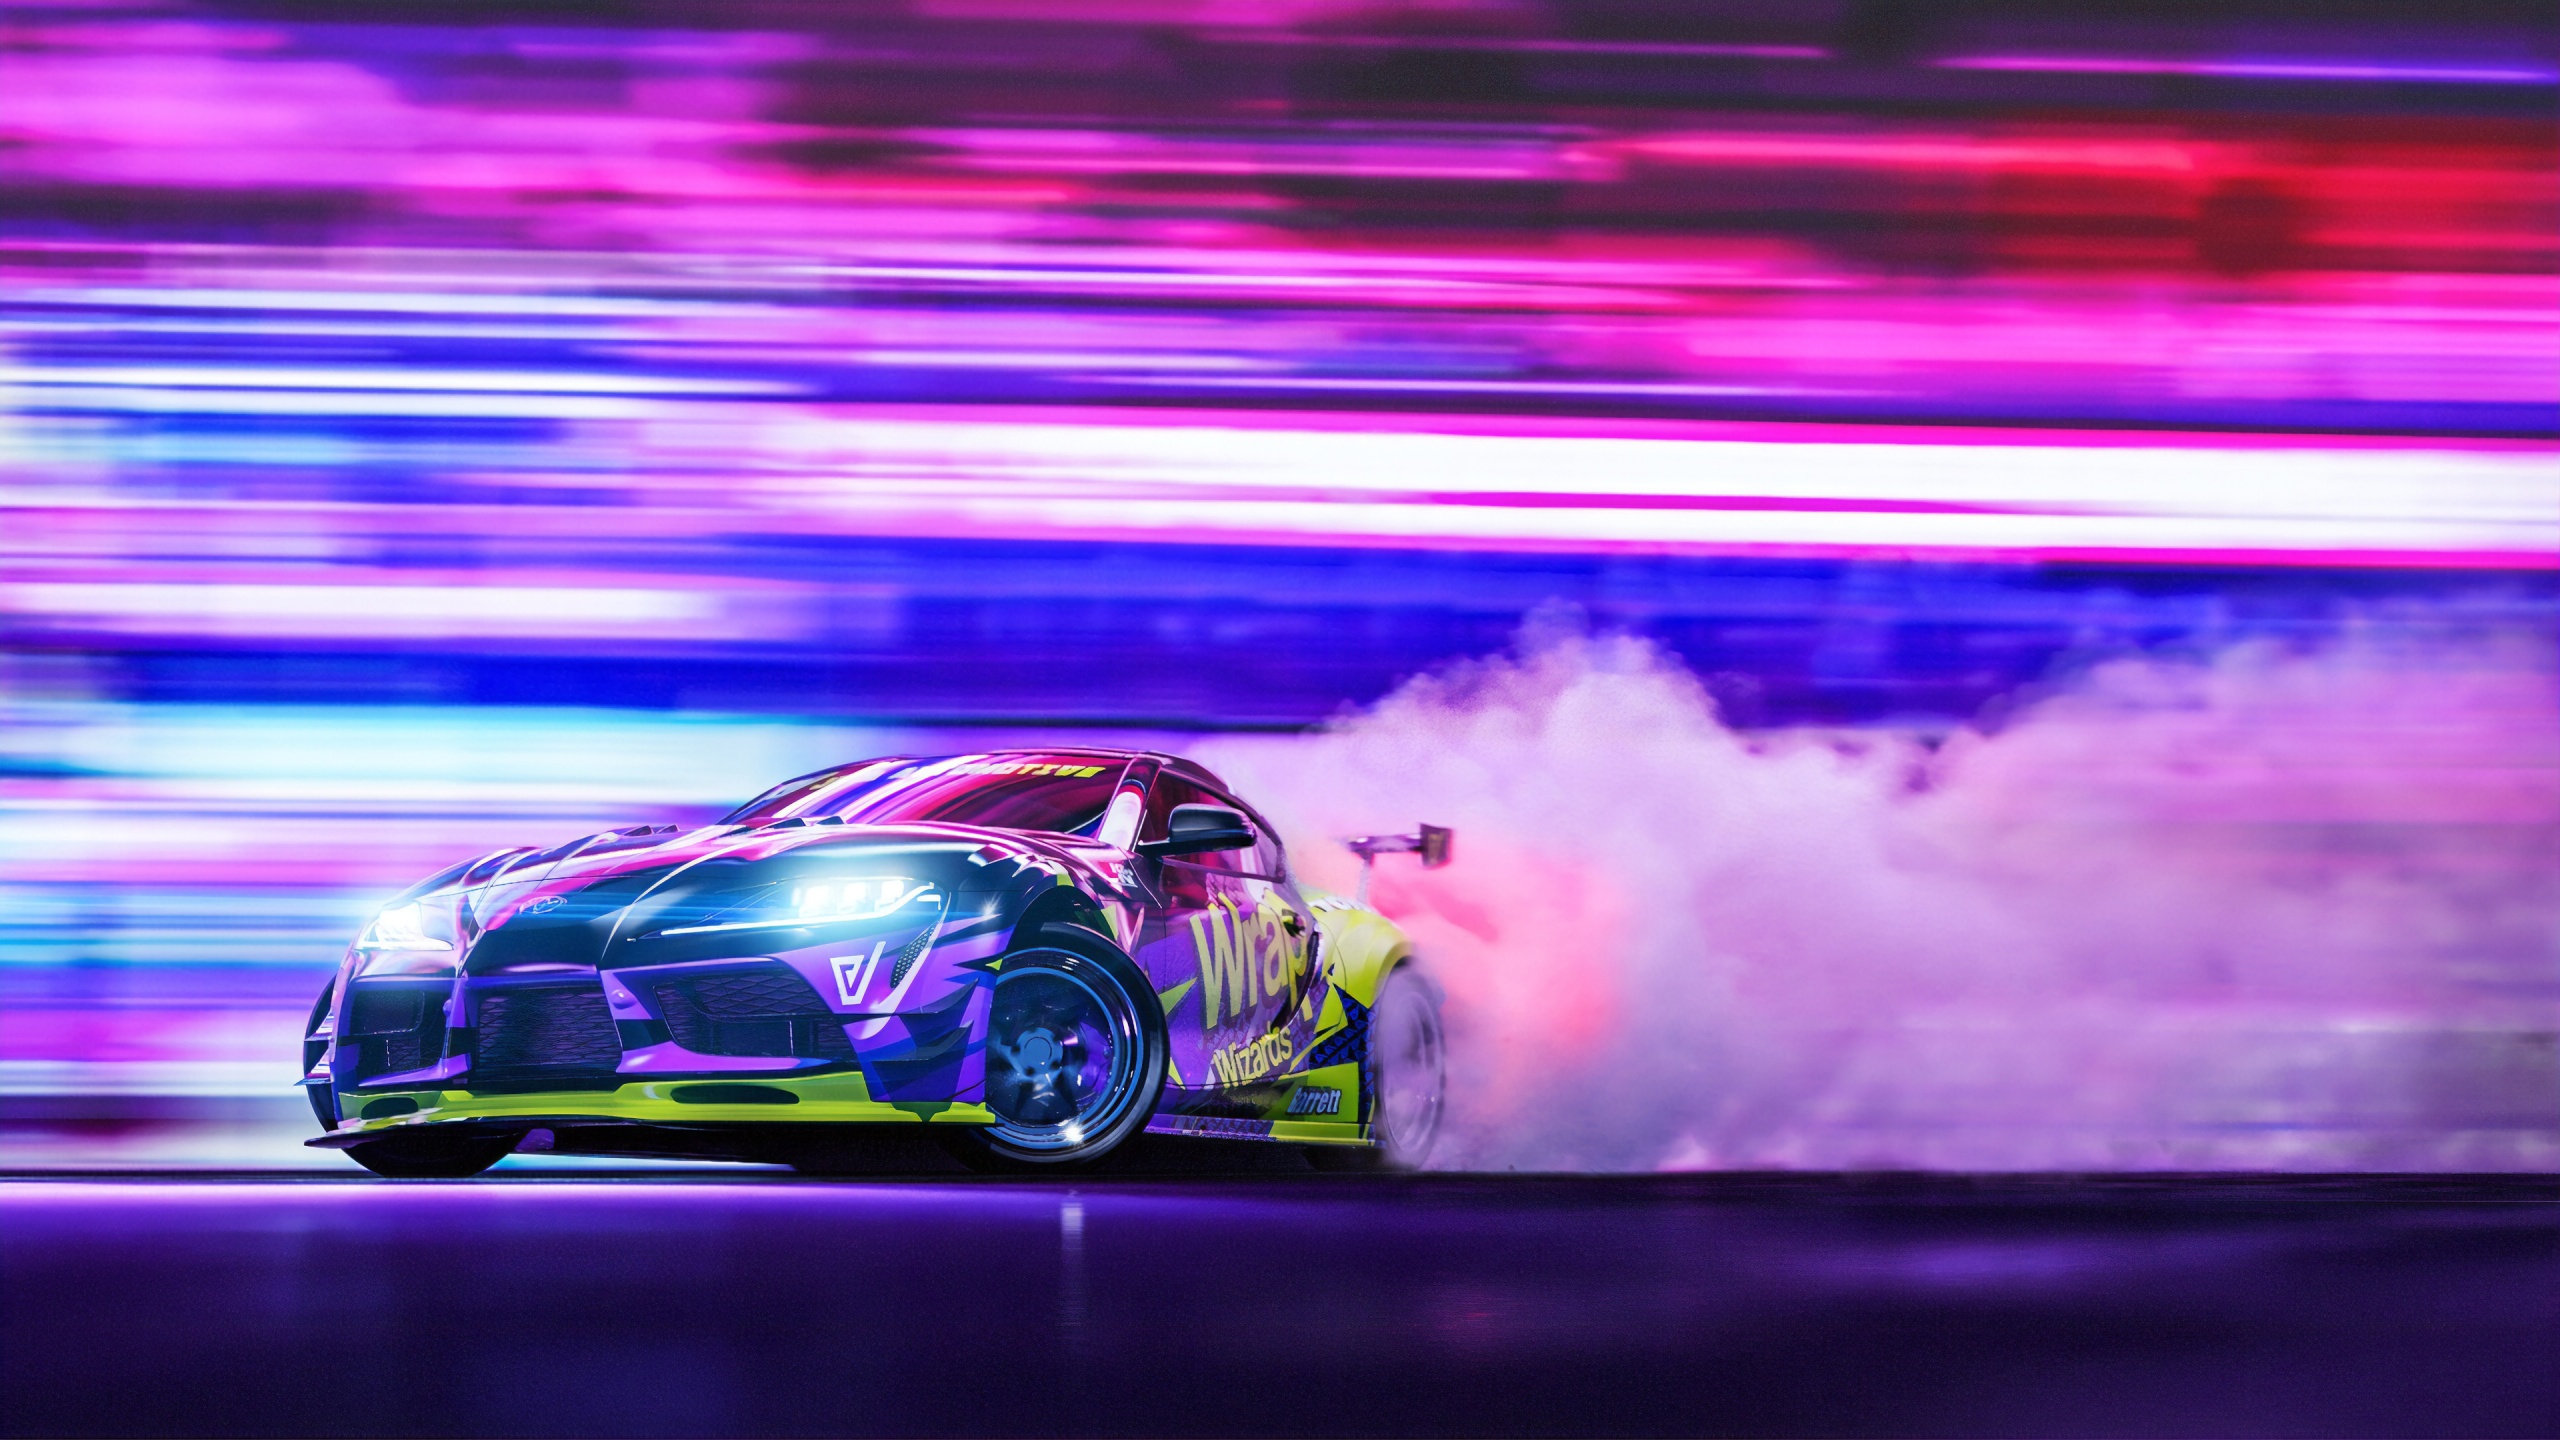 Drift live wallpaper for Android. Drift free download for tablet and phone.